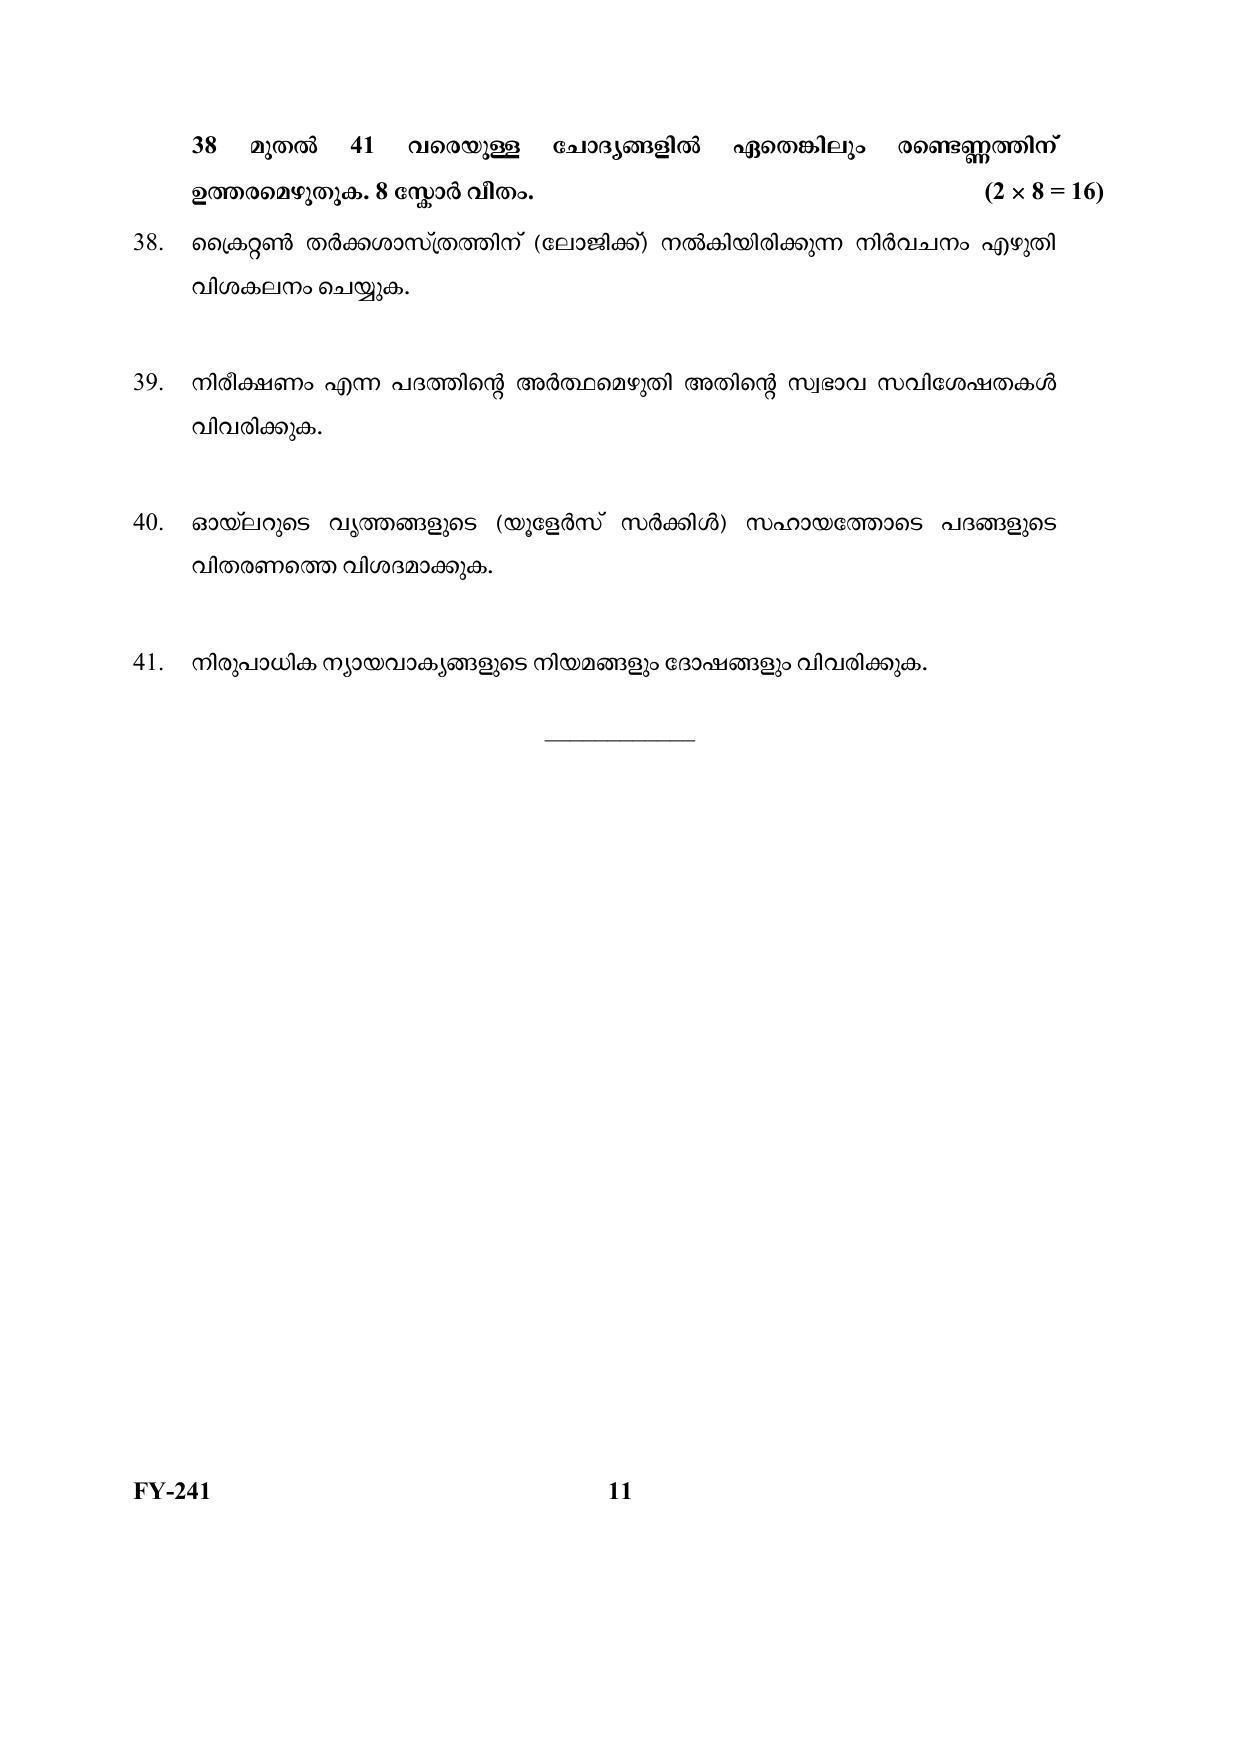 Kerala Plus One (Class 11th) Philosaphy Question Paper 2021 - Page 11